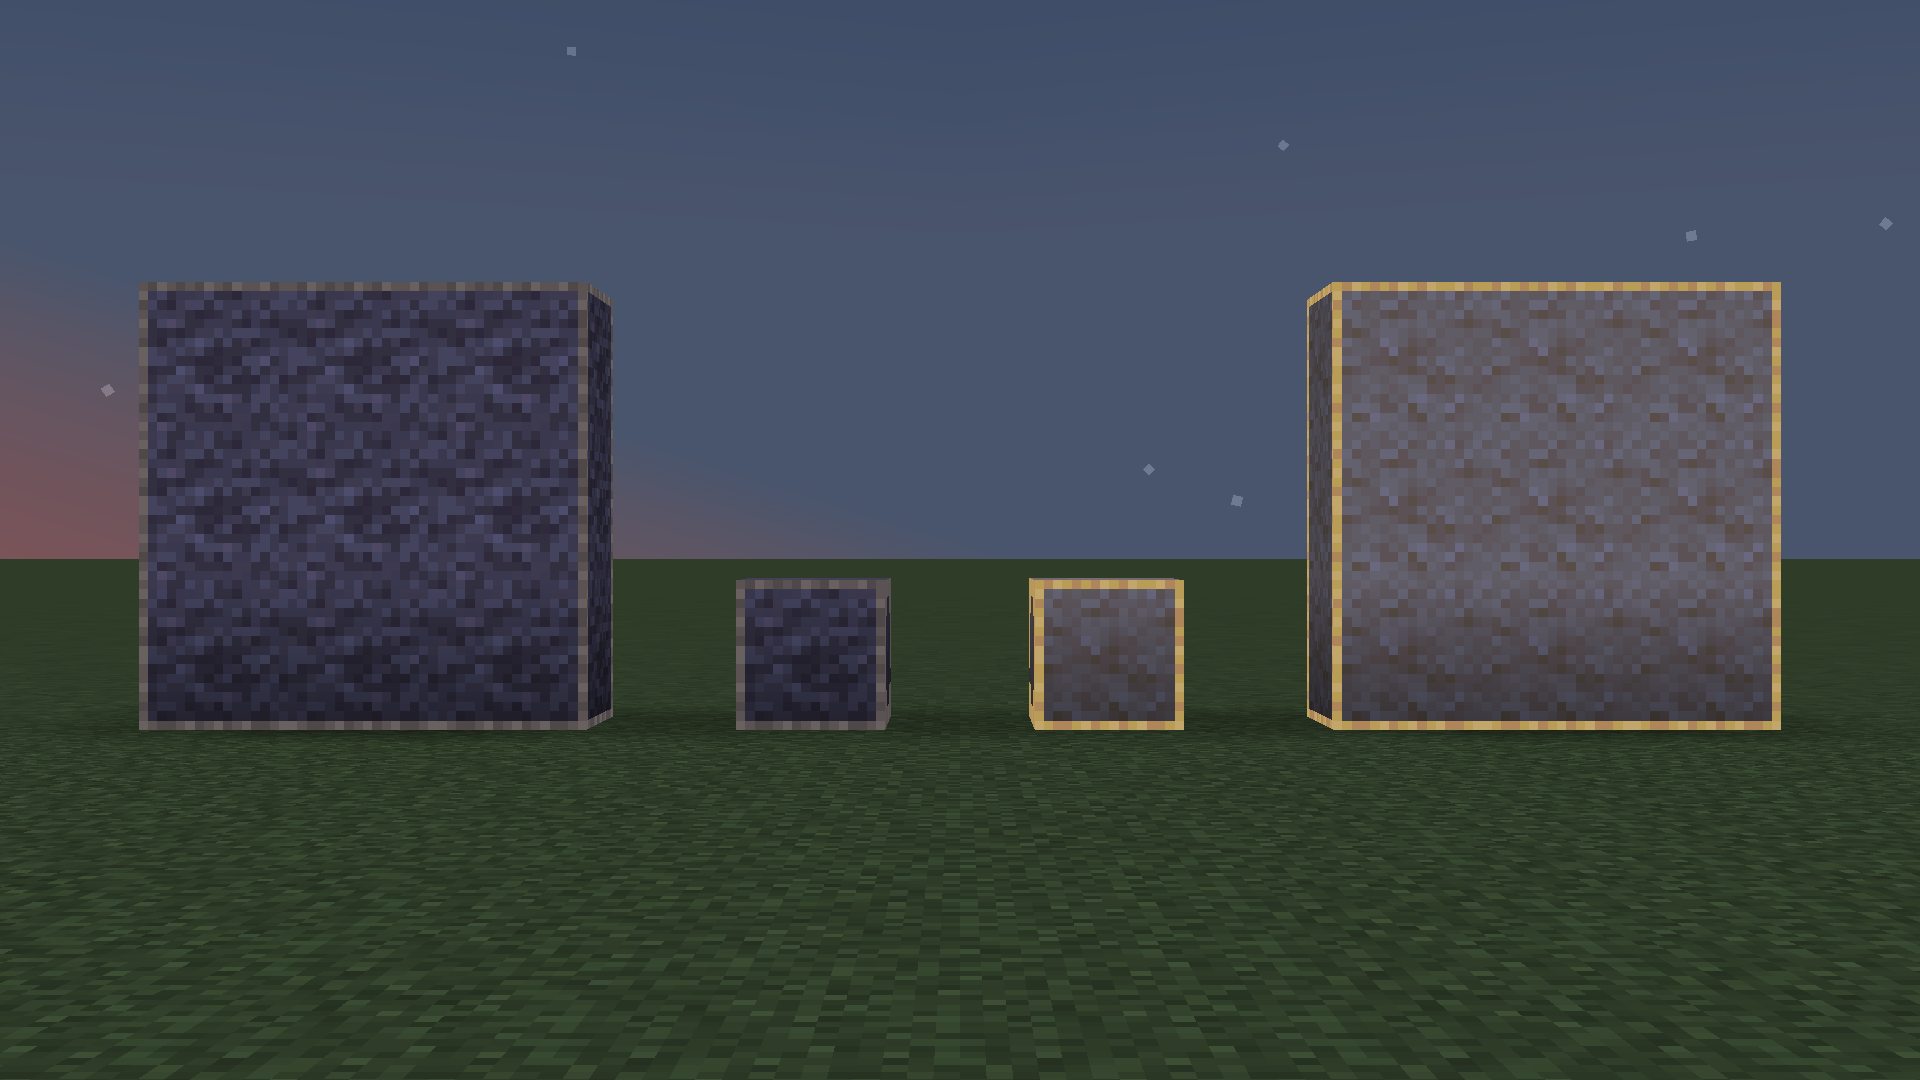 Showcasing both blocks and their emissive and connecting properties.